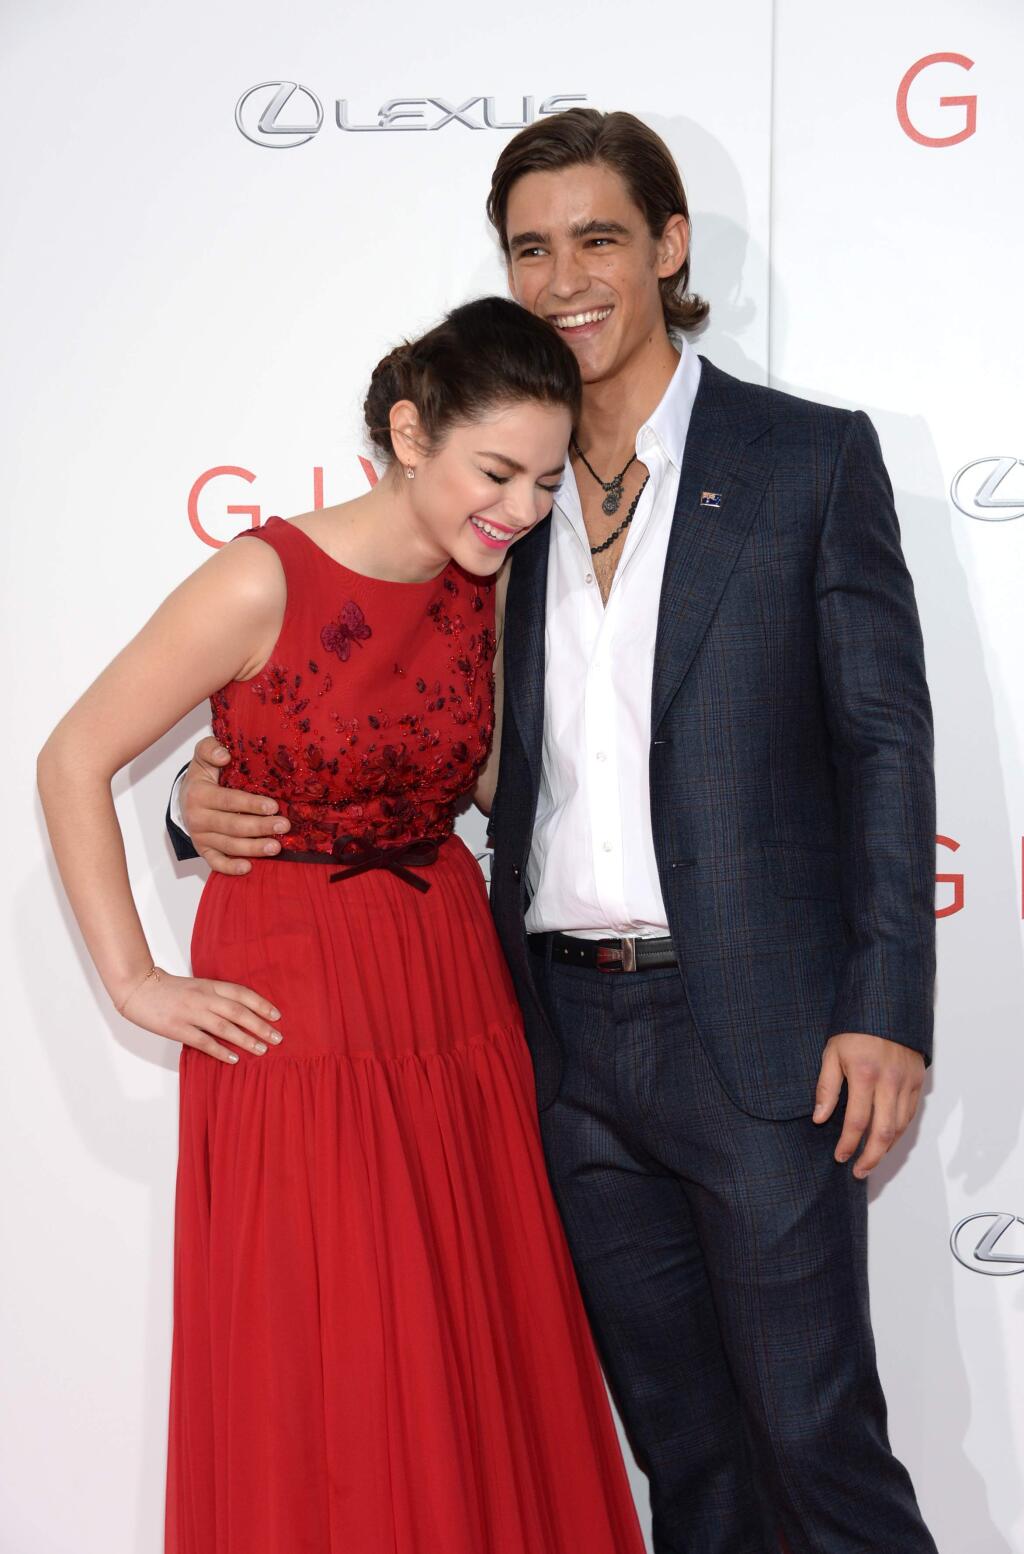 Odeya Rush and Brenton Thwaites arrive at New York premiere of 'The Giver' at the Zeigfeld Theater on Monday, Aug. 11, 2014, in New York. (Photo by Evan Agostini/Invision/AP)